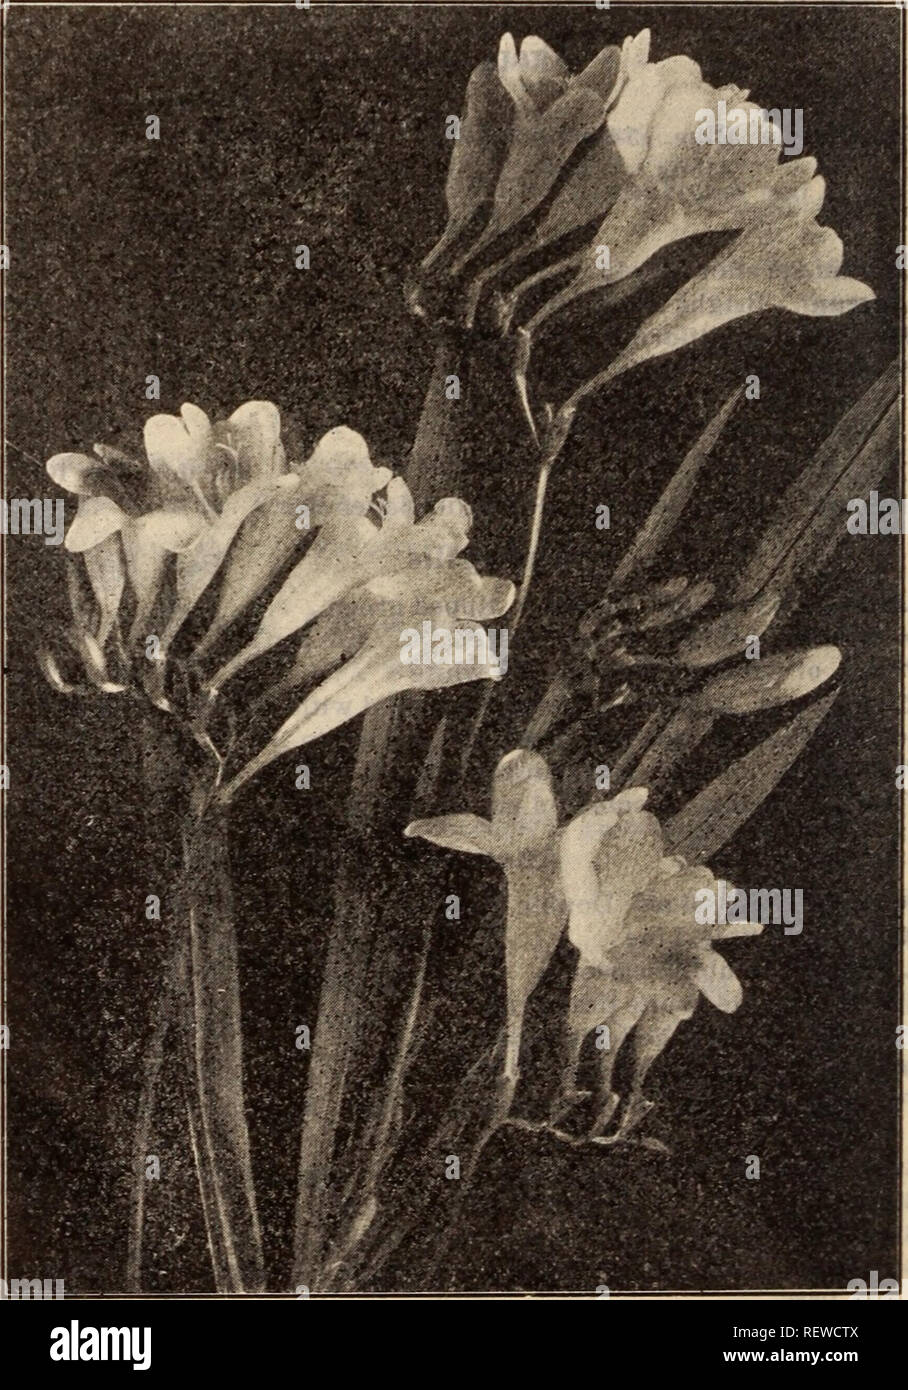 . Dreer's wholesale price list / Henry A. Dreer.. Nursery Catalogue. PHILADELPHIA. PA., WHOLESALE PRICE LIST WHITE CALLA LILIES Callas Perdoz. Per 100 Per 1000 White. All thoroughly ripened roots; even the smallest will flower freely. Mammoth Roots |1 75 $12 00 $100 00 Selected Roots 1 25 8 00 75 00 First Size Roots 85 5 50 50 00 Black (Arum Sanctum) 85 6 00 Chinodoxa (Glory of the Snow) Per 100 Per 1000 Lucillse. Bright sky blue 75 $6 50 Qieantea. Soft lavender blue 85 7 50 Sardensis. Rich, deep blue 75 6 50 Clivia (Imantophyllum) Each Per doz. Mlniatum. Strong, 5-inch pots 50 $5 00 Crocus Wh Stock Photo